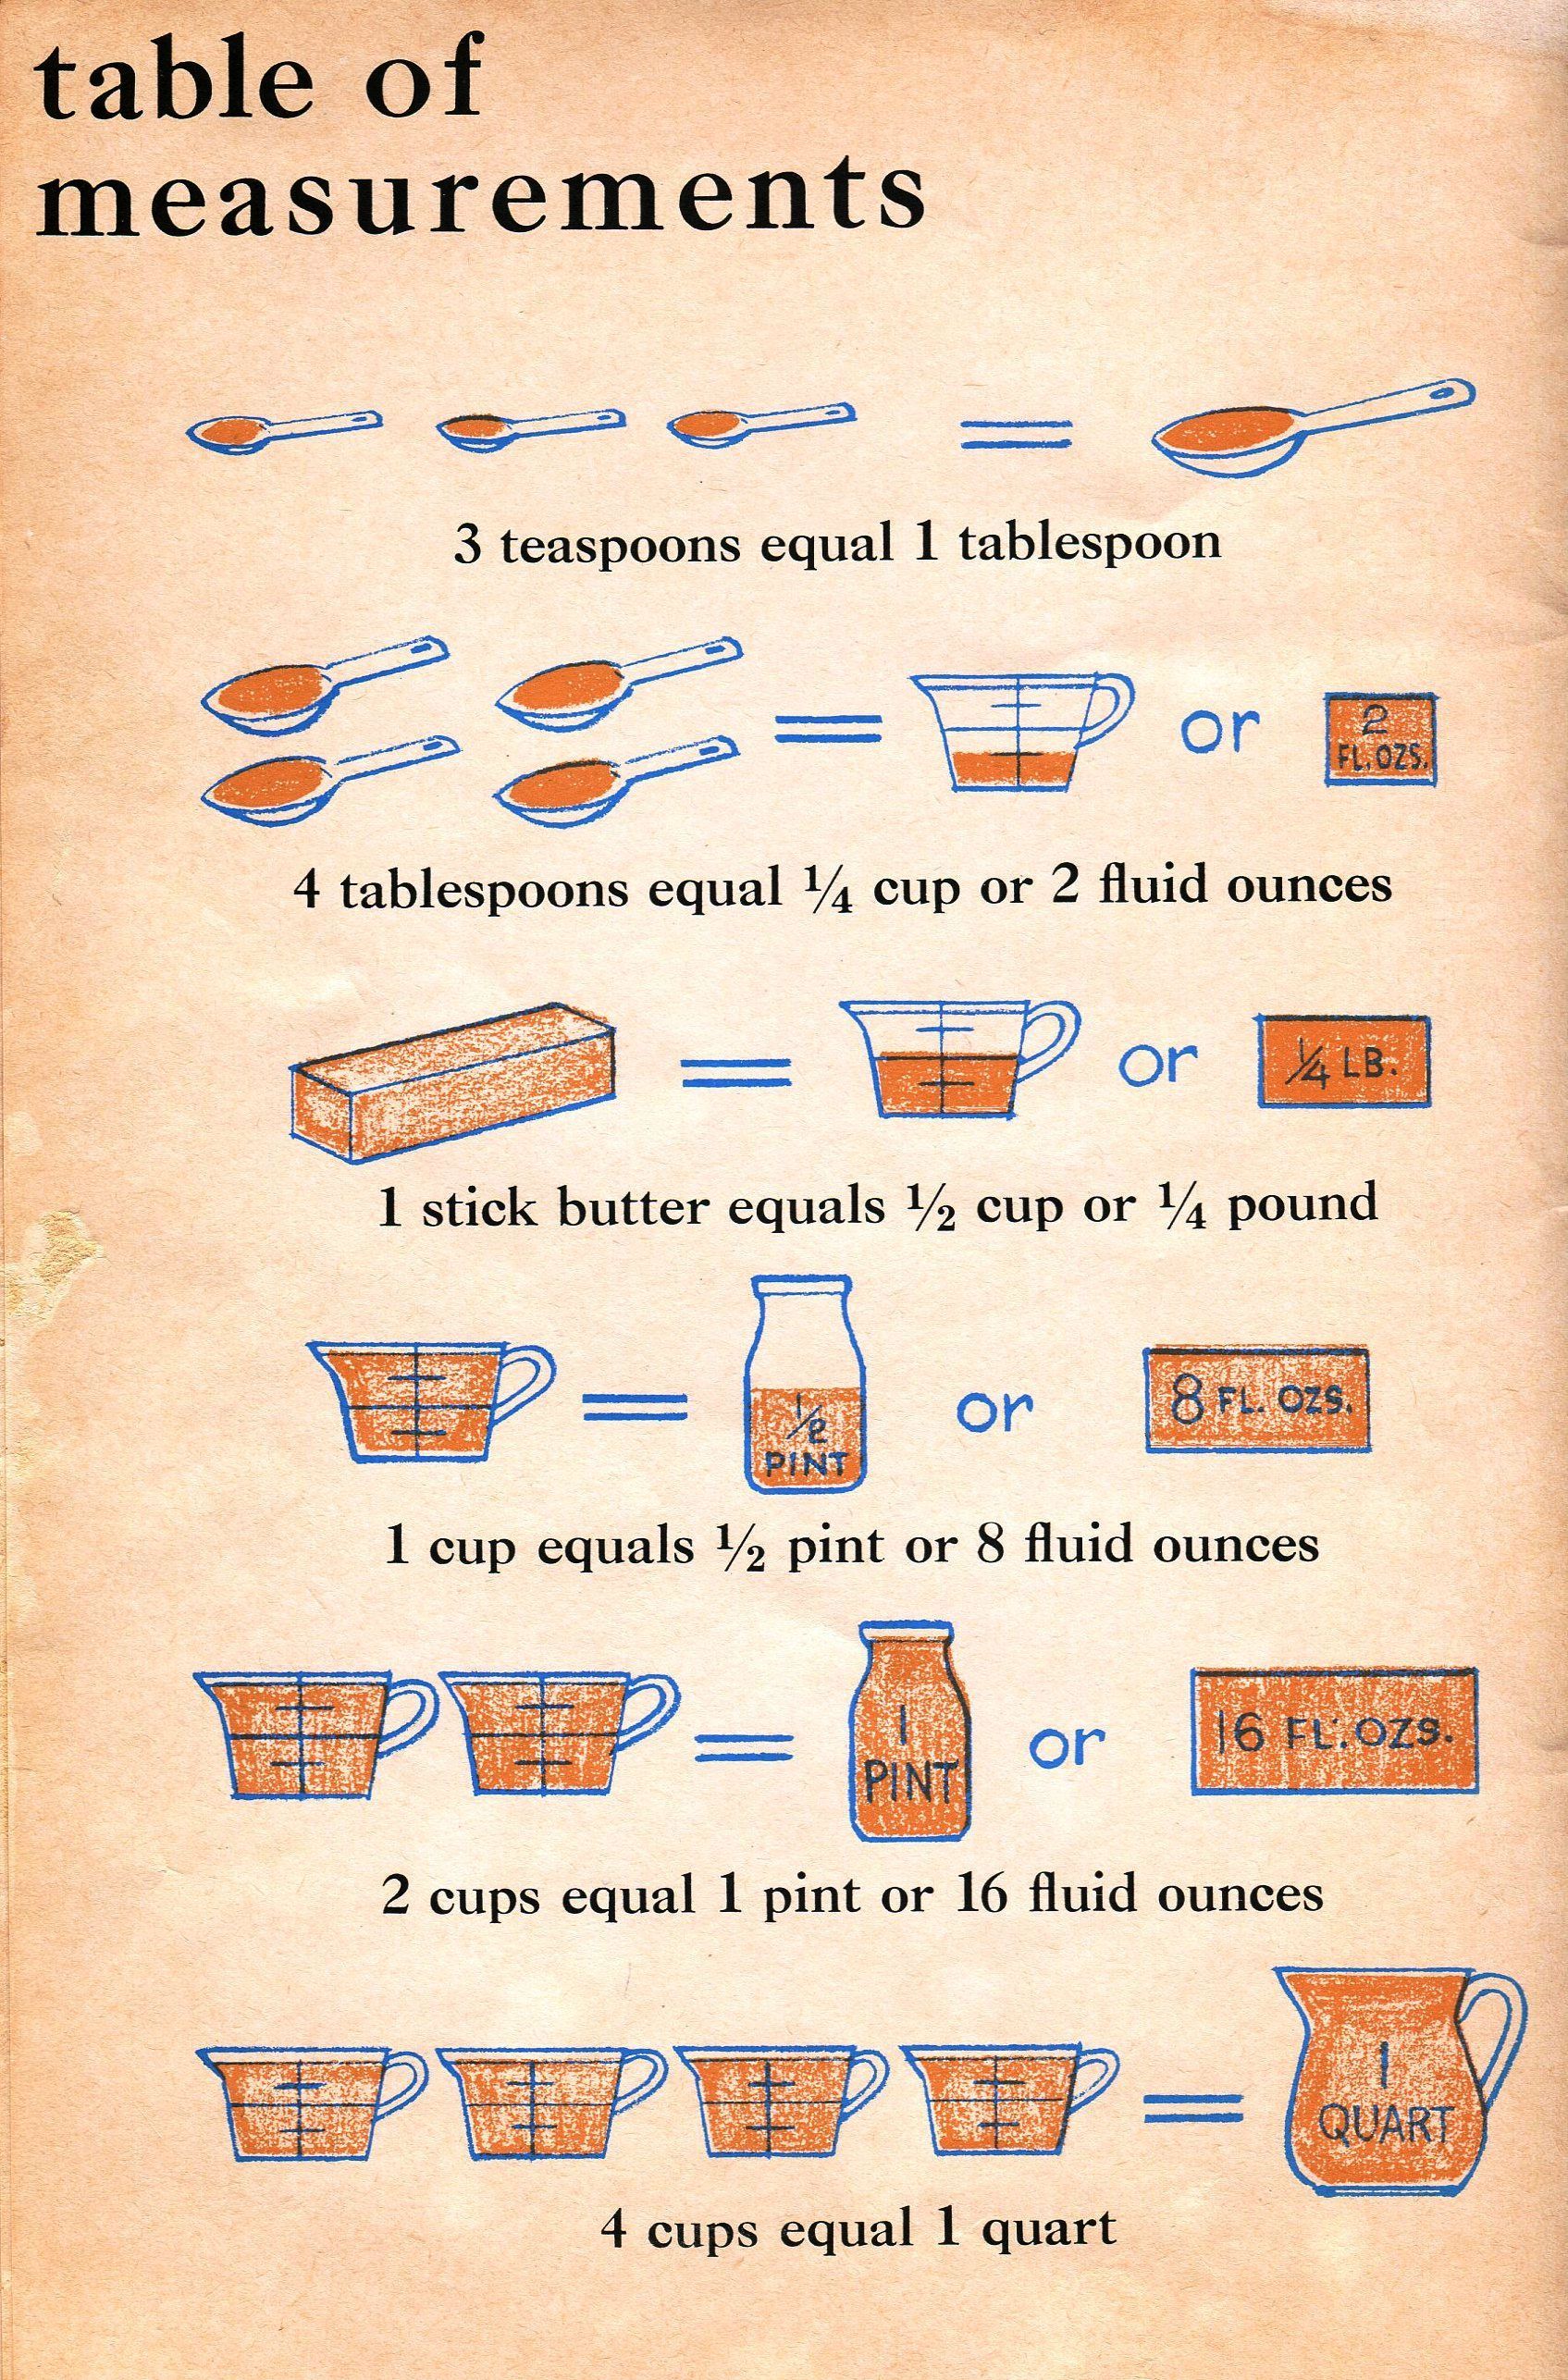 Table of measurements.